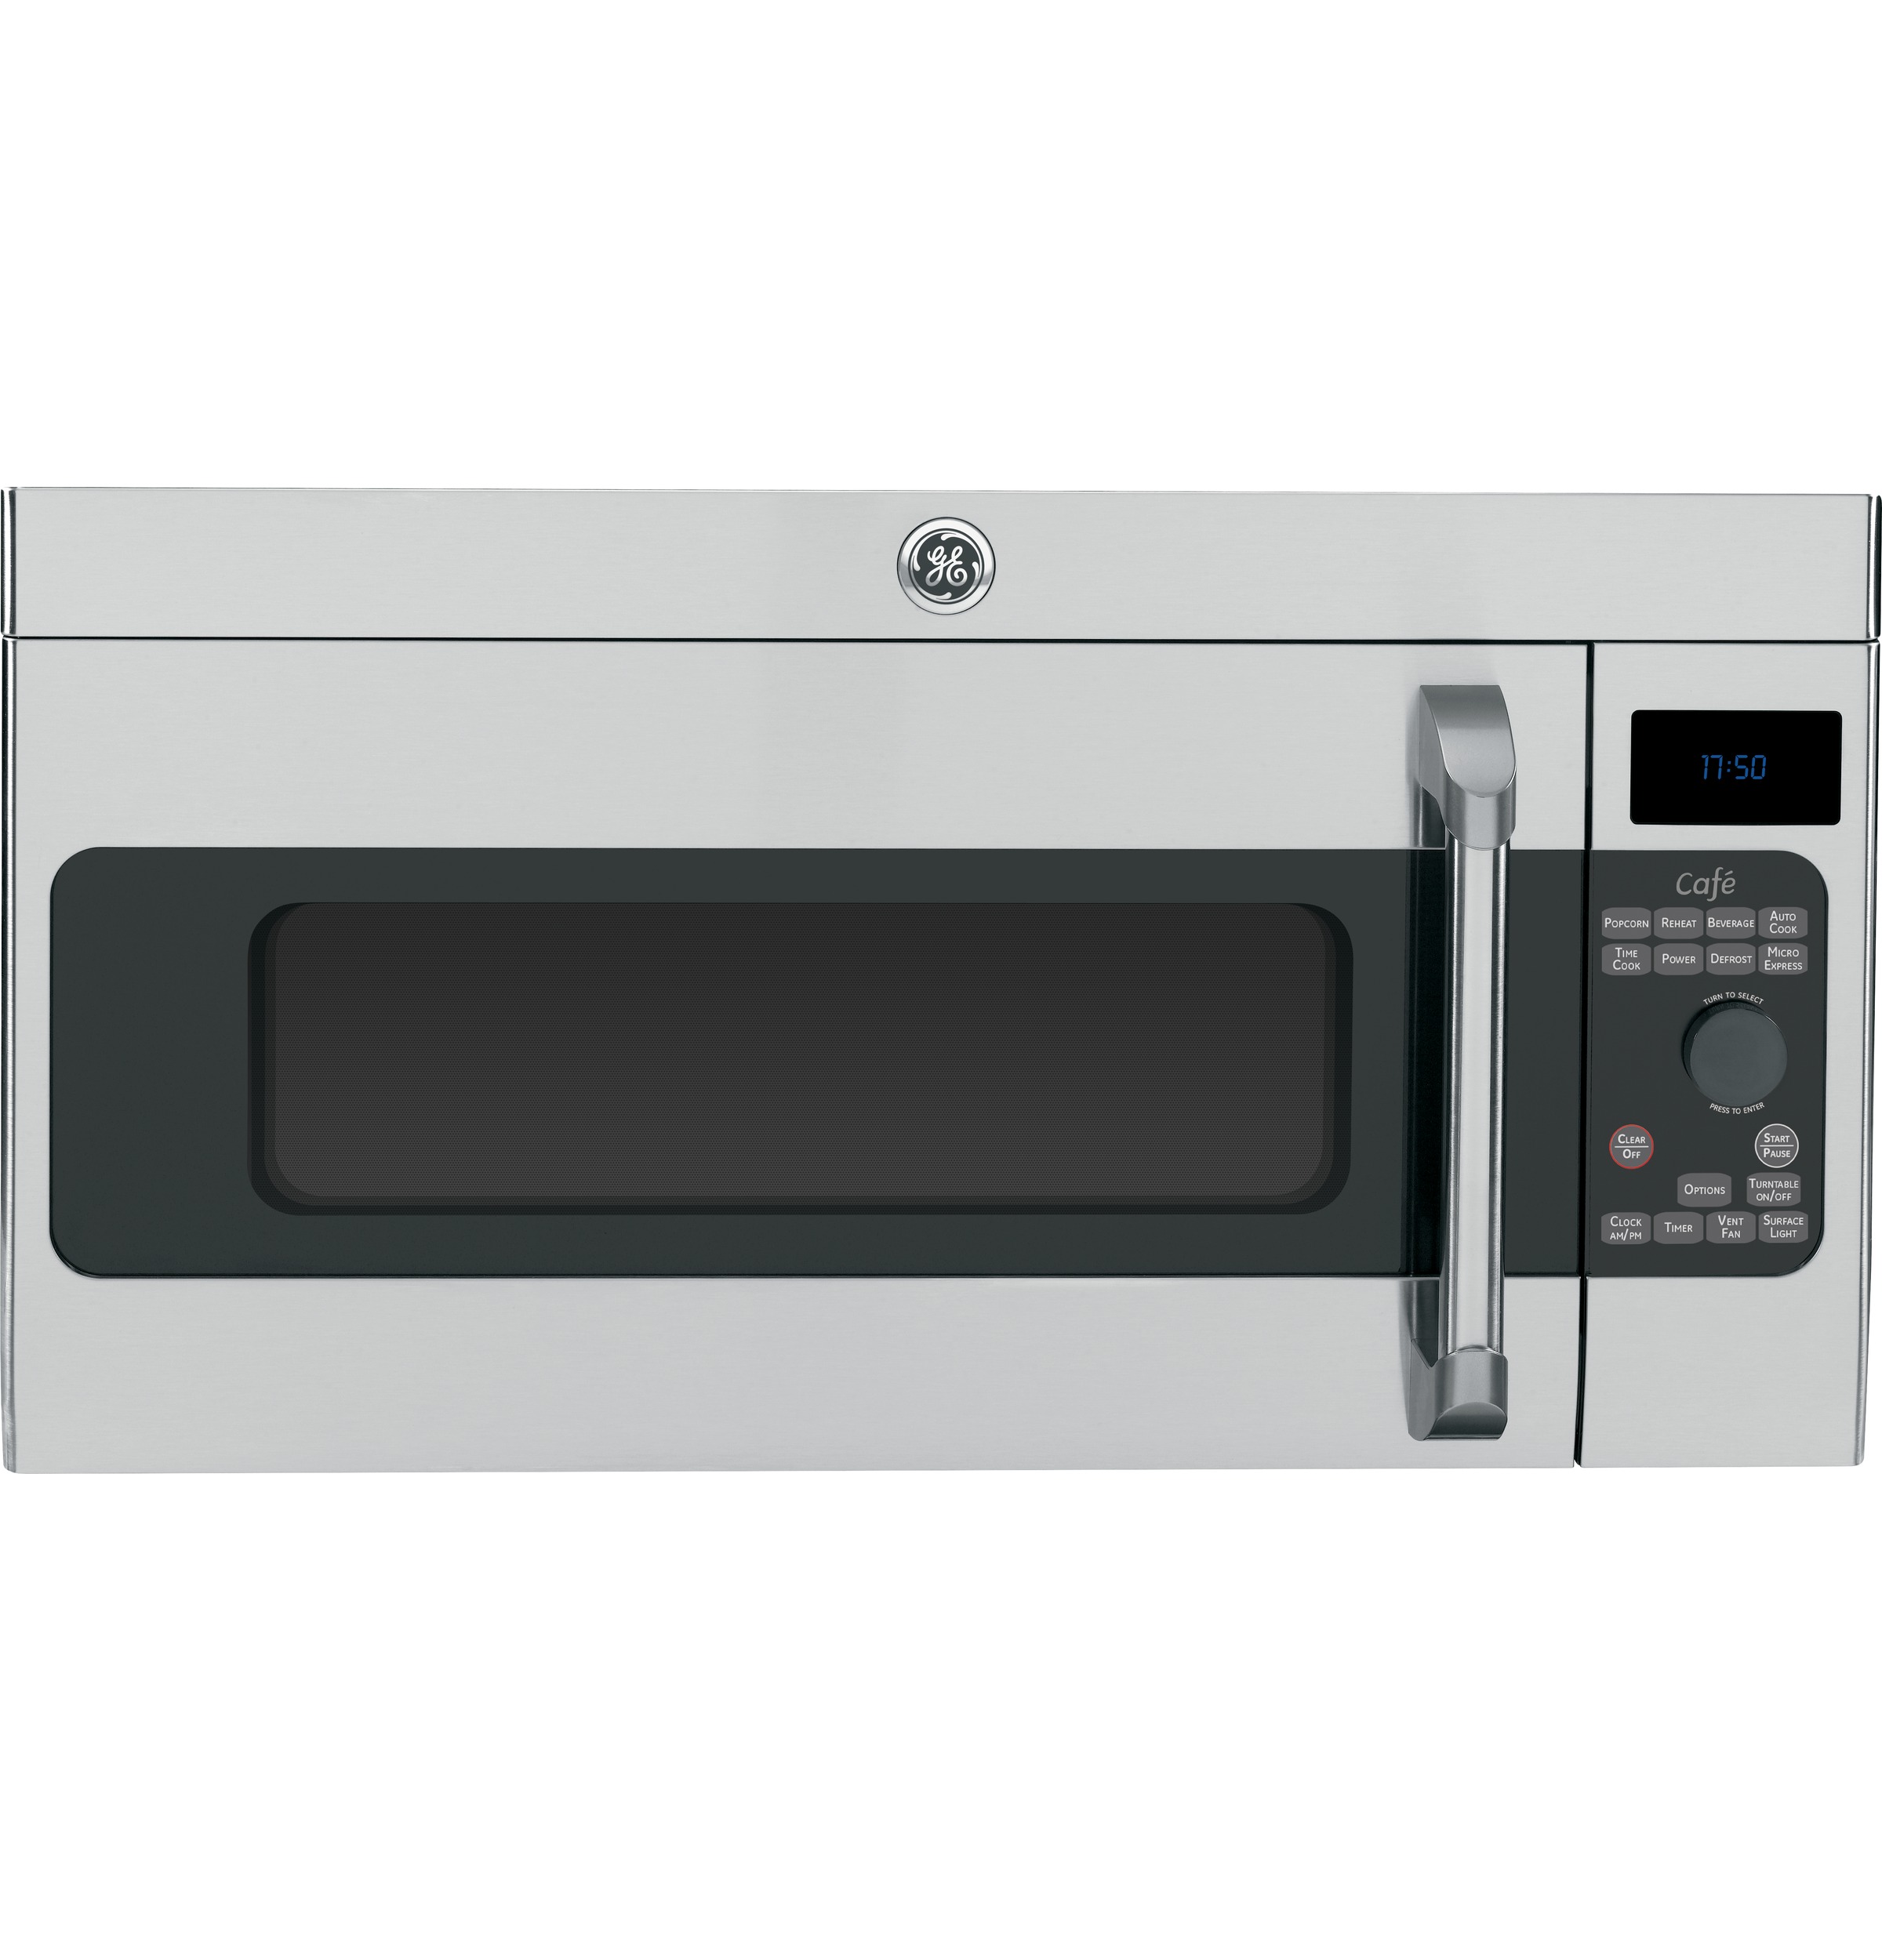 GE Café™ Series 1.7 Cu. Ft. Over-the-Range Microwave Oven